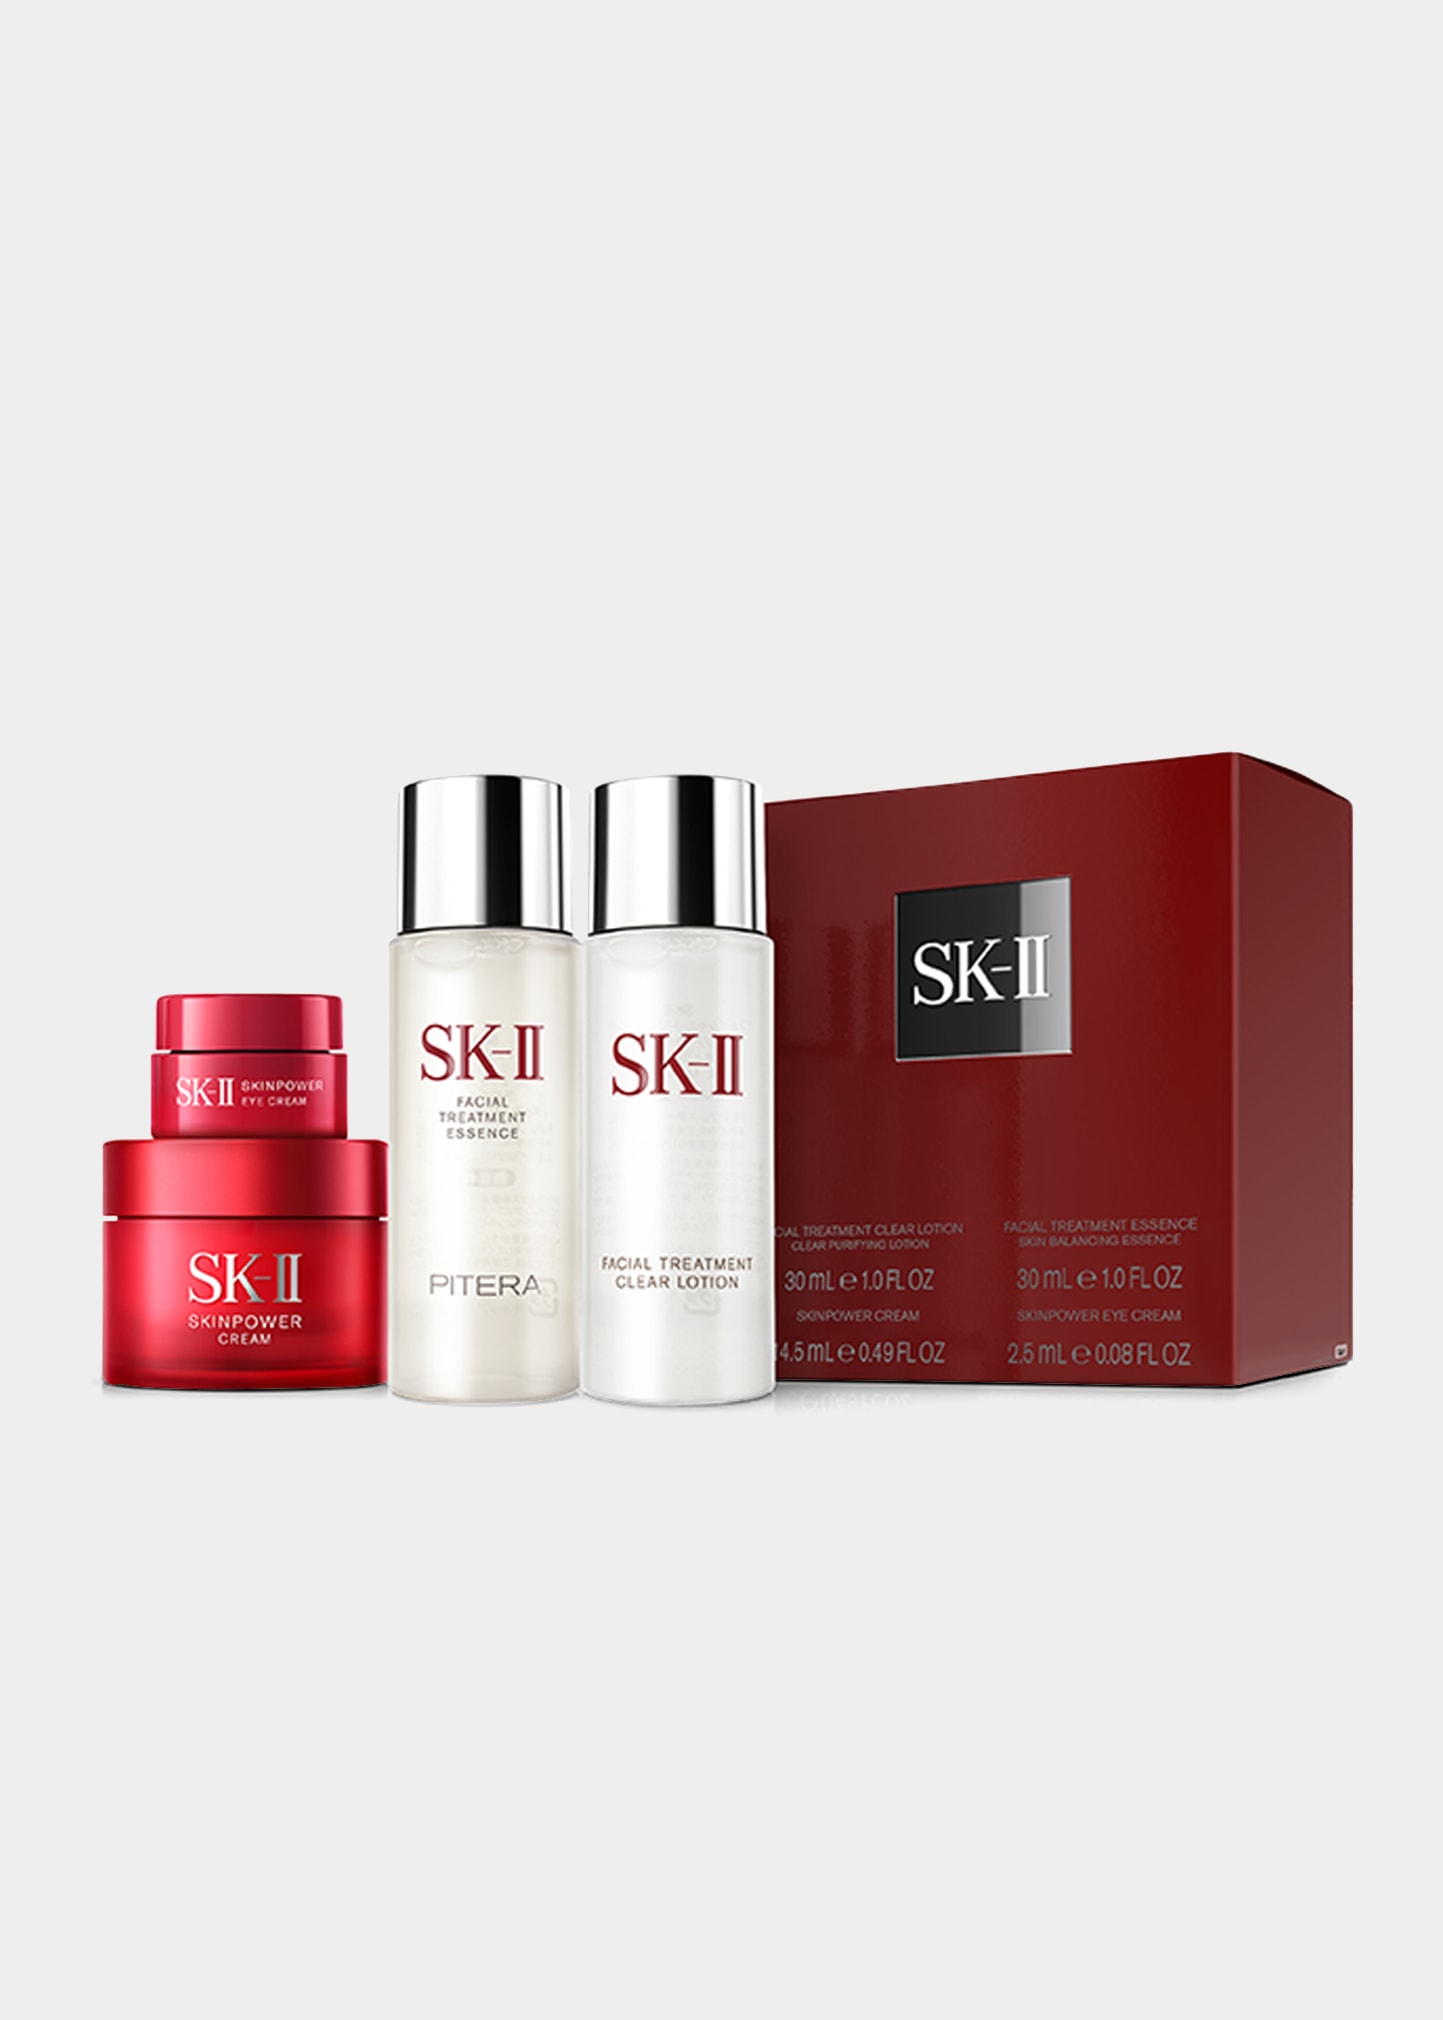 Pitera Experience Kit 2, Yours with any $400 SK-II Purchase